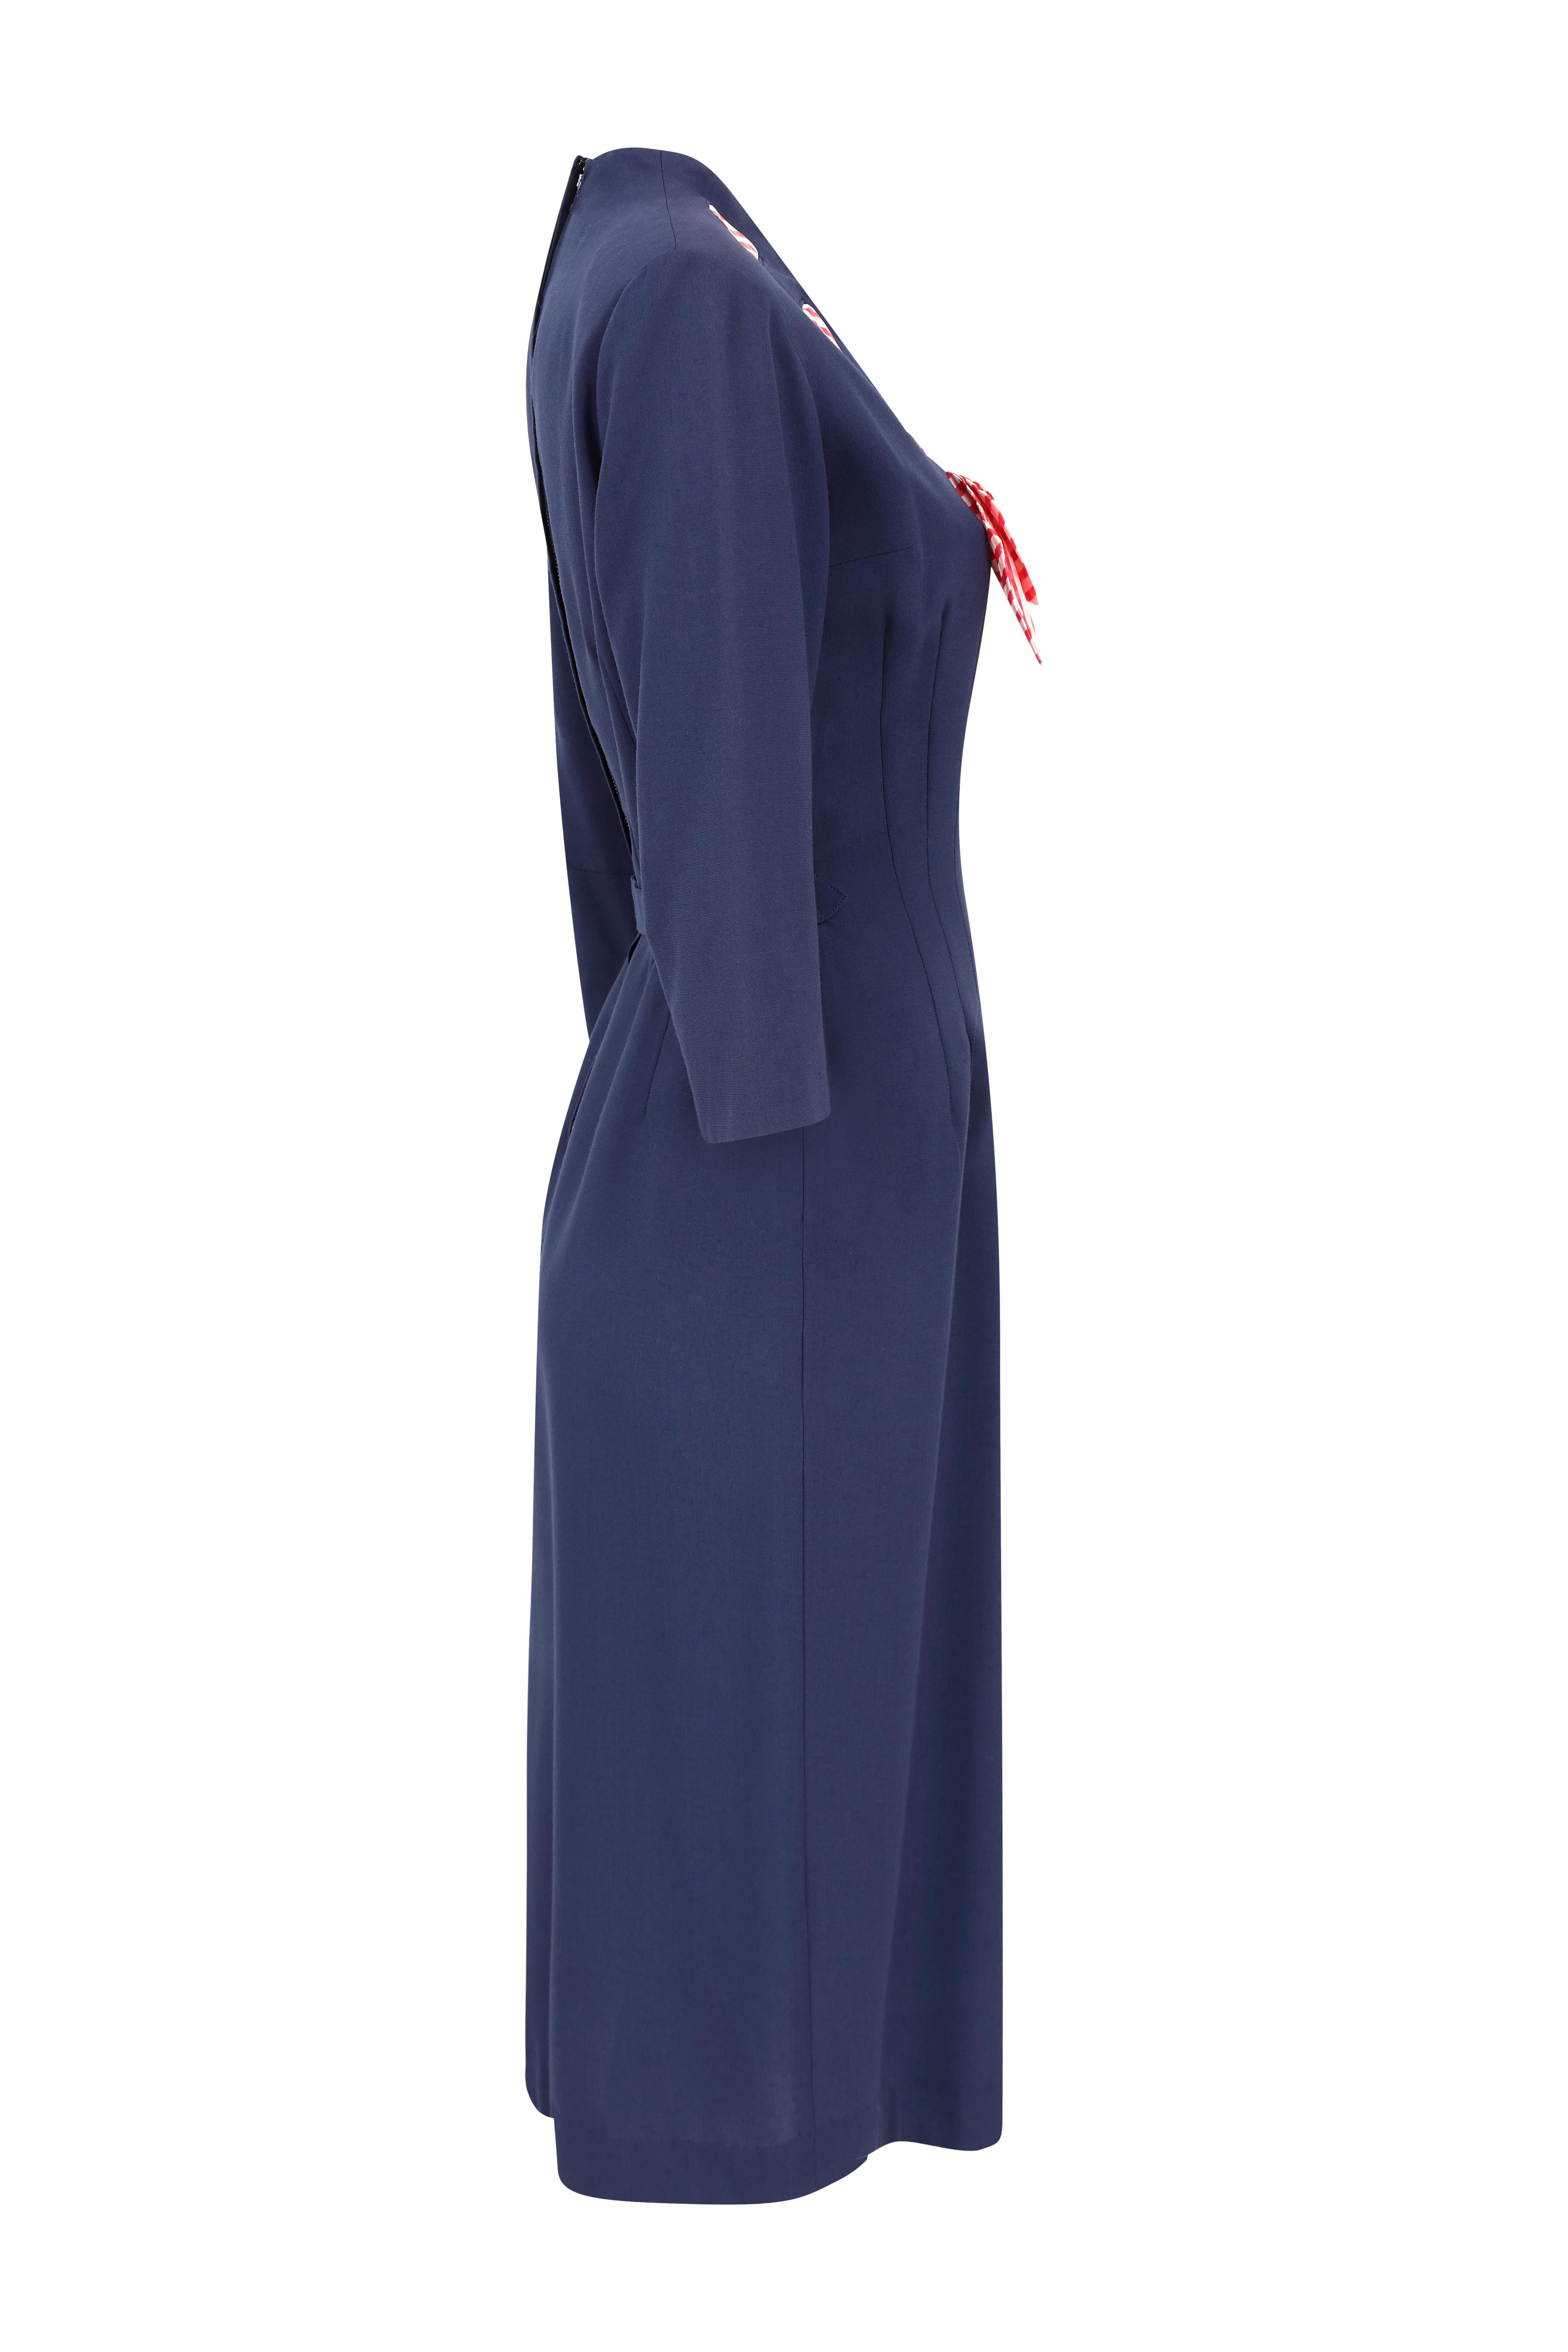 This sensational 1940s navy patriotic dress is incredibly rare and in absolutely impeccable vintage condition to the point that it is the best we have ever seen or are likely to see again. This piece will have been made around 1945-47 and the label,